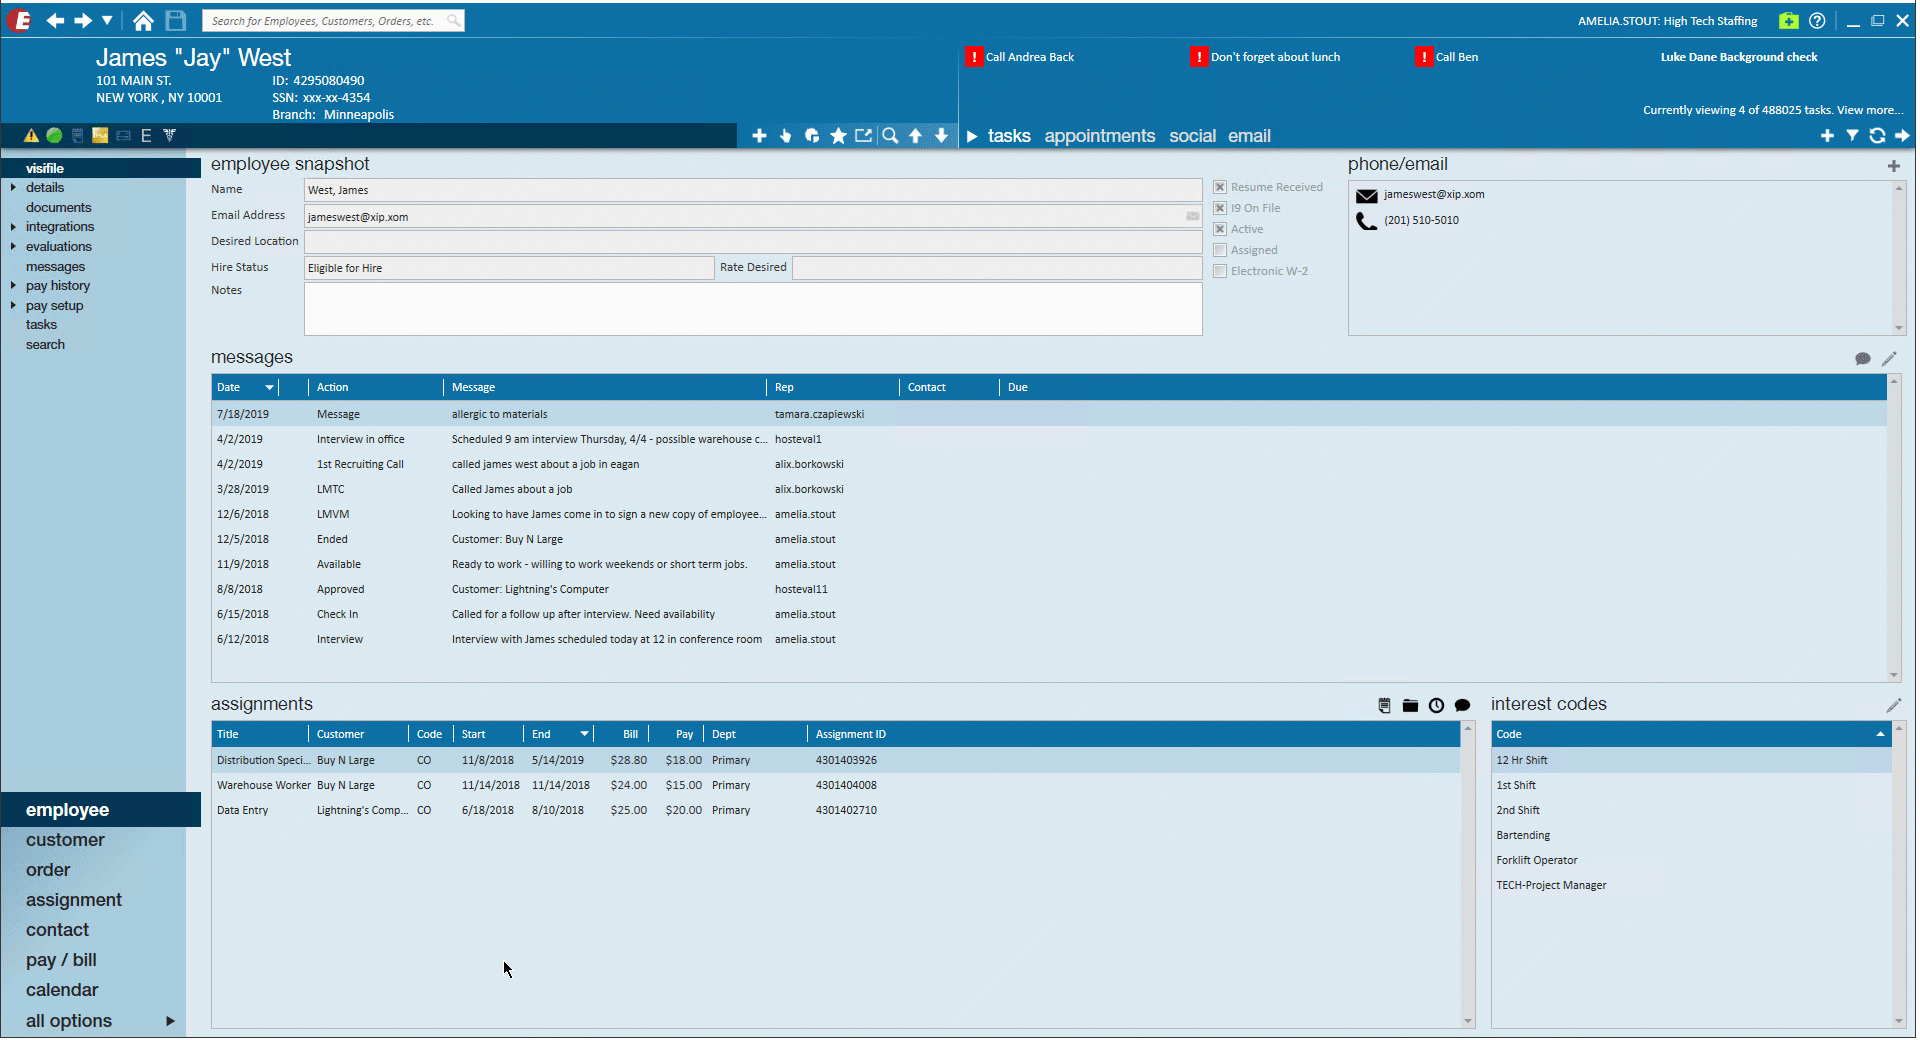 GIF showing overview of employee record